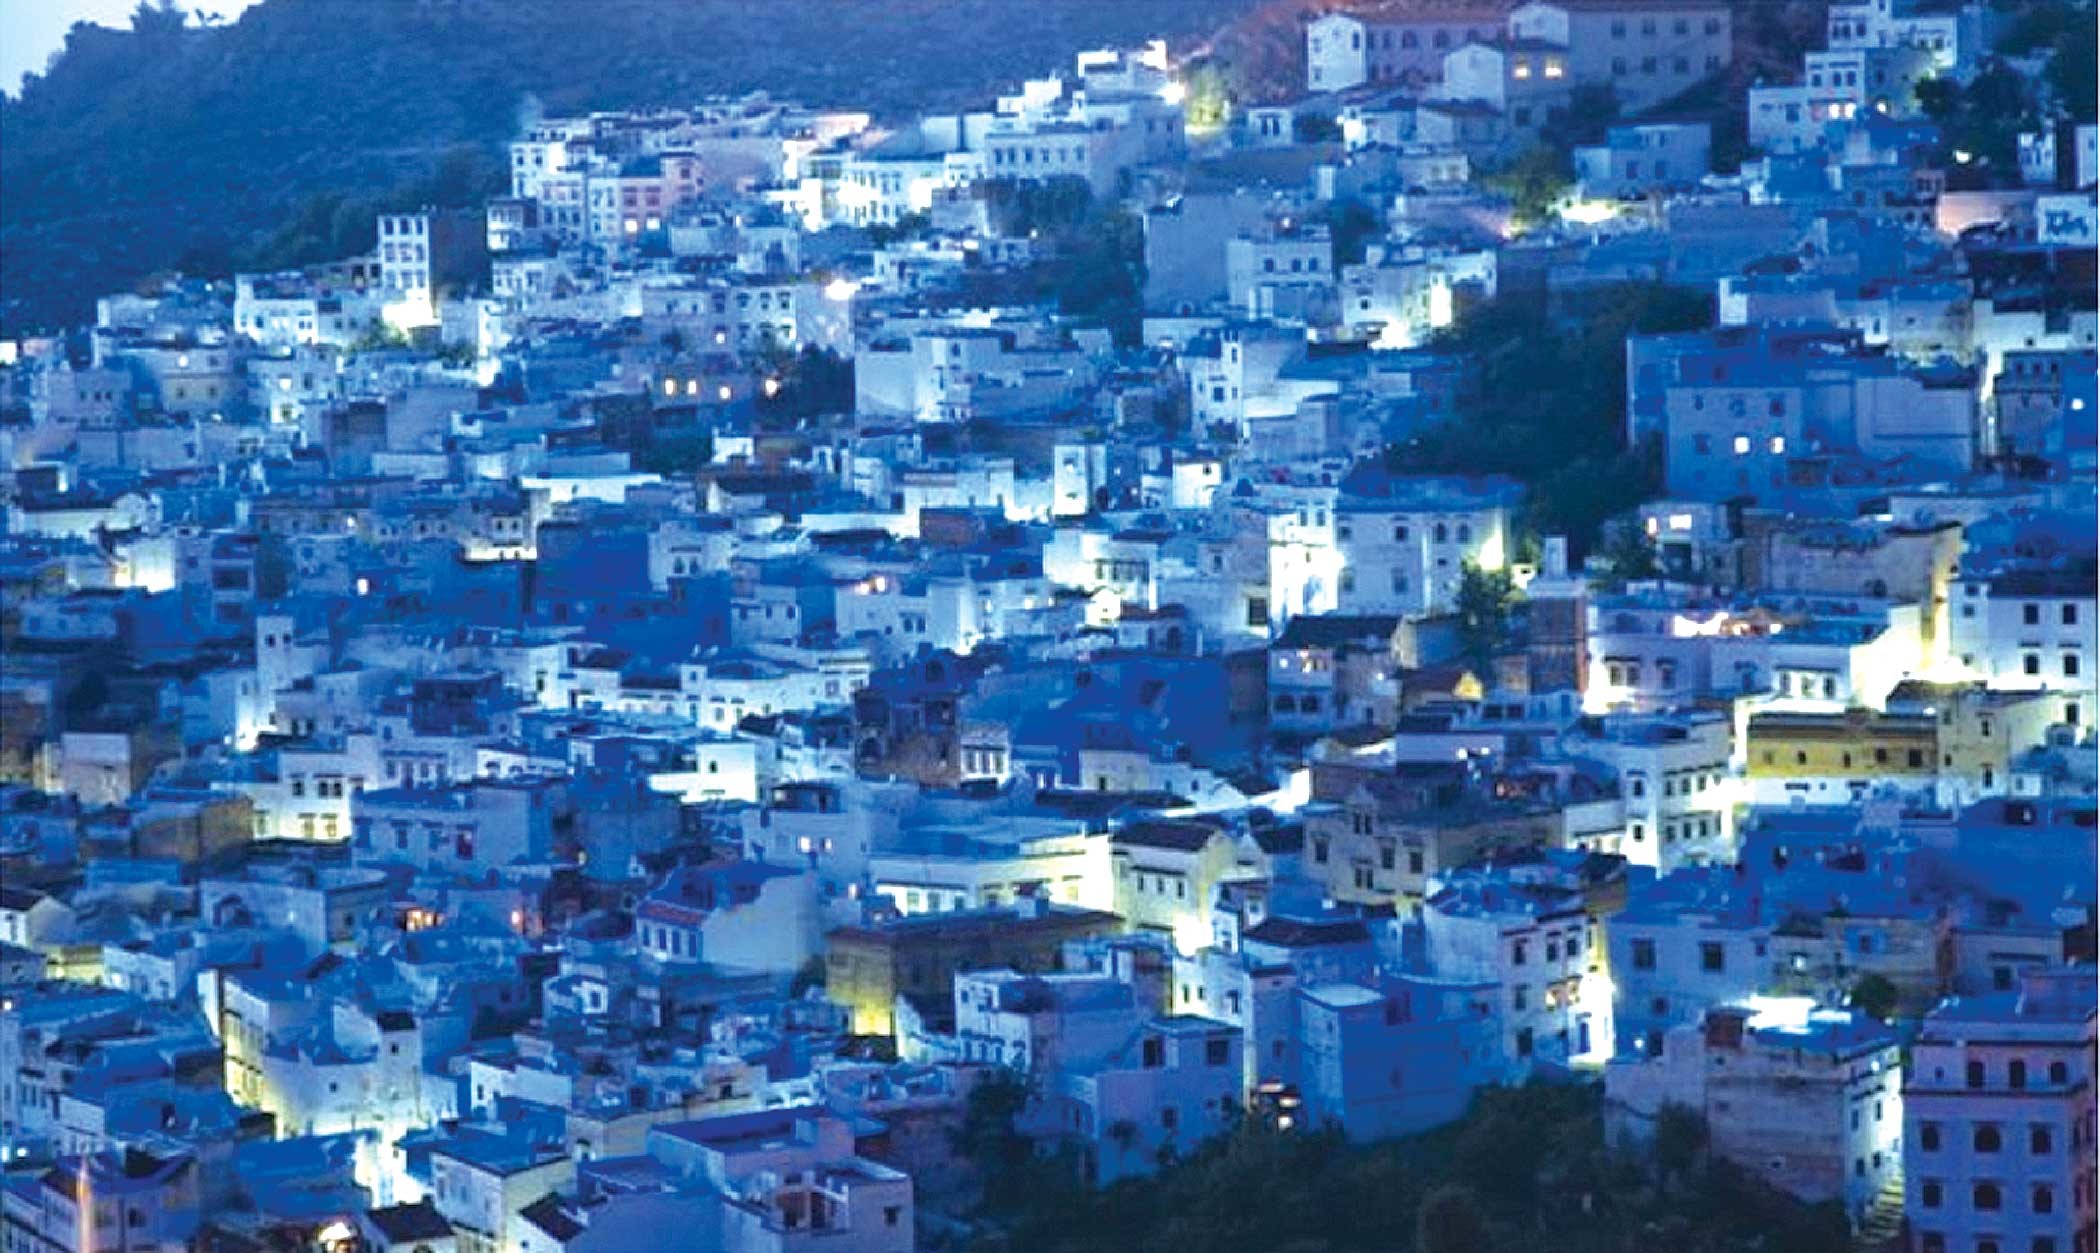 2100x1253 chefchaouen – the Blue City of Morocco